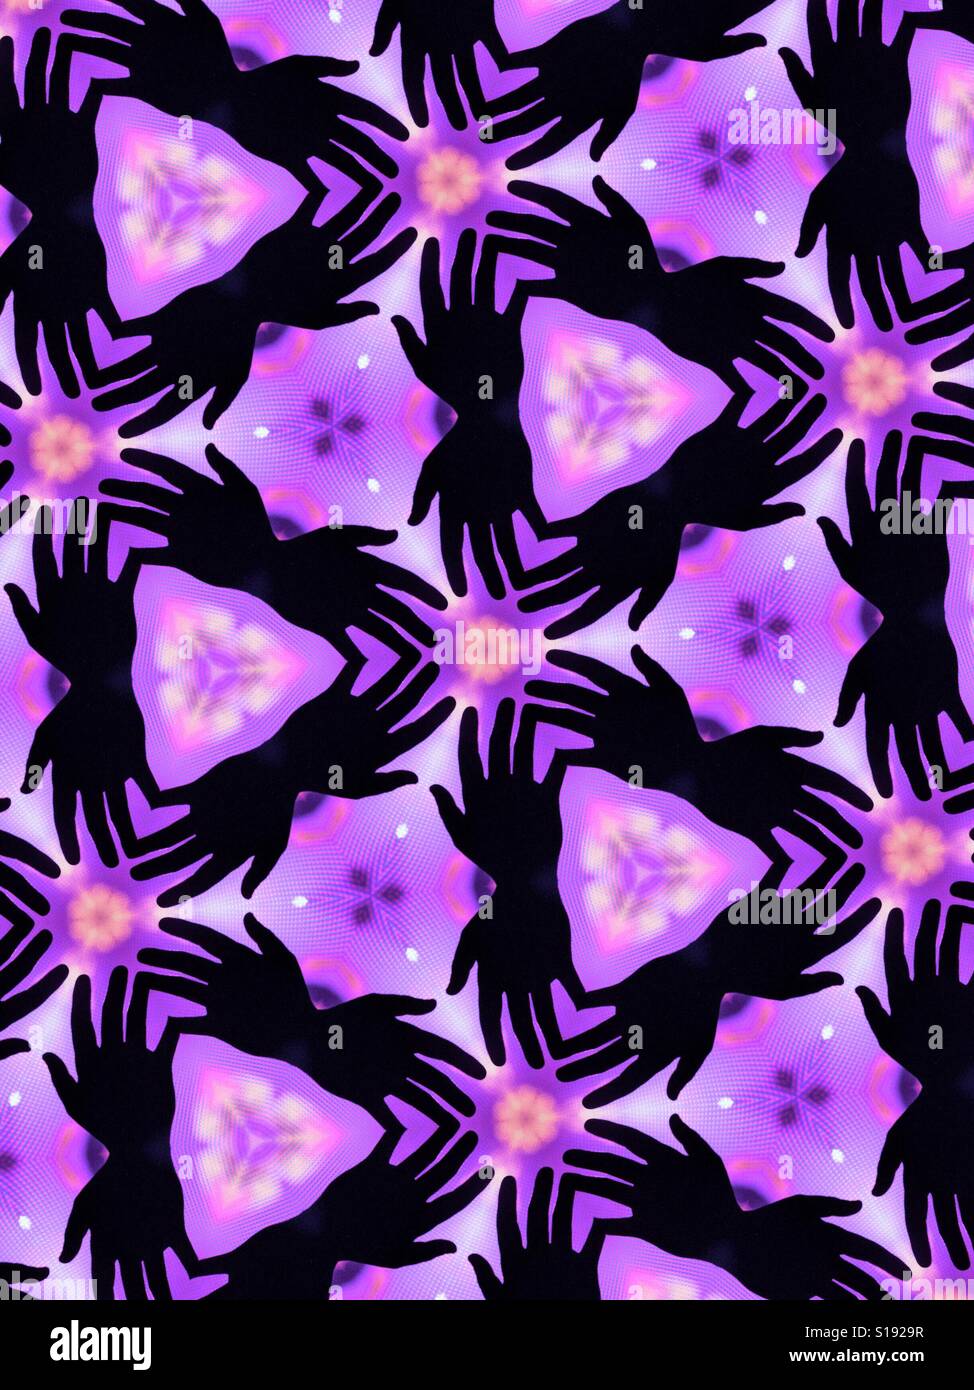 An abstract kaleidoscopic image of silhouetted outstretched hands against a purple background Stock Photo